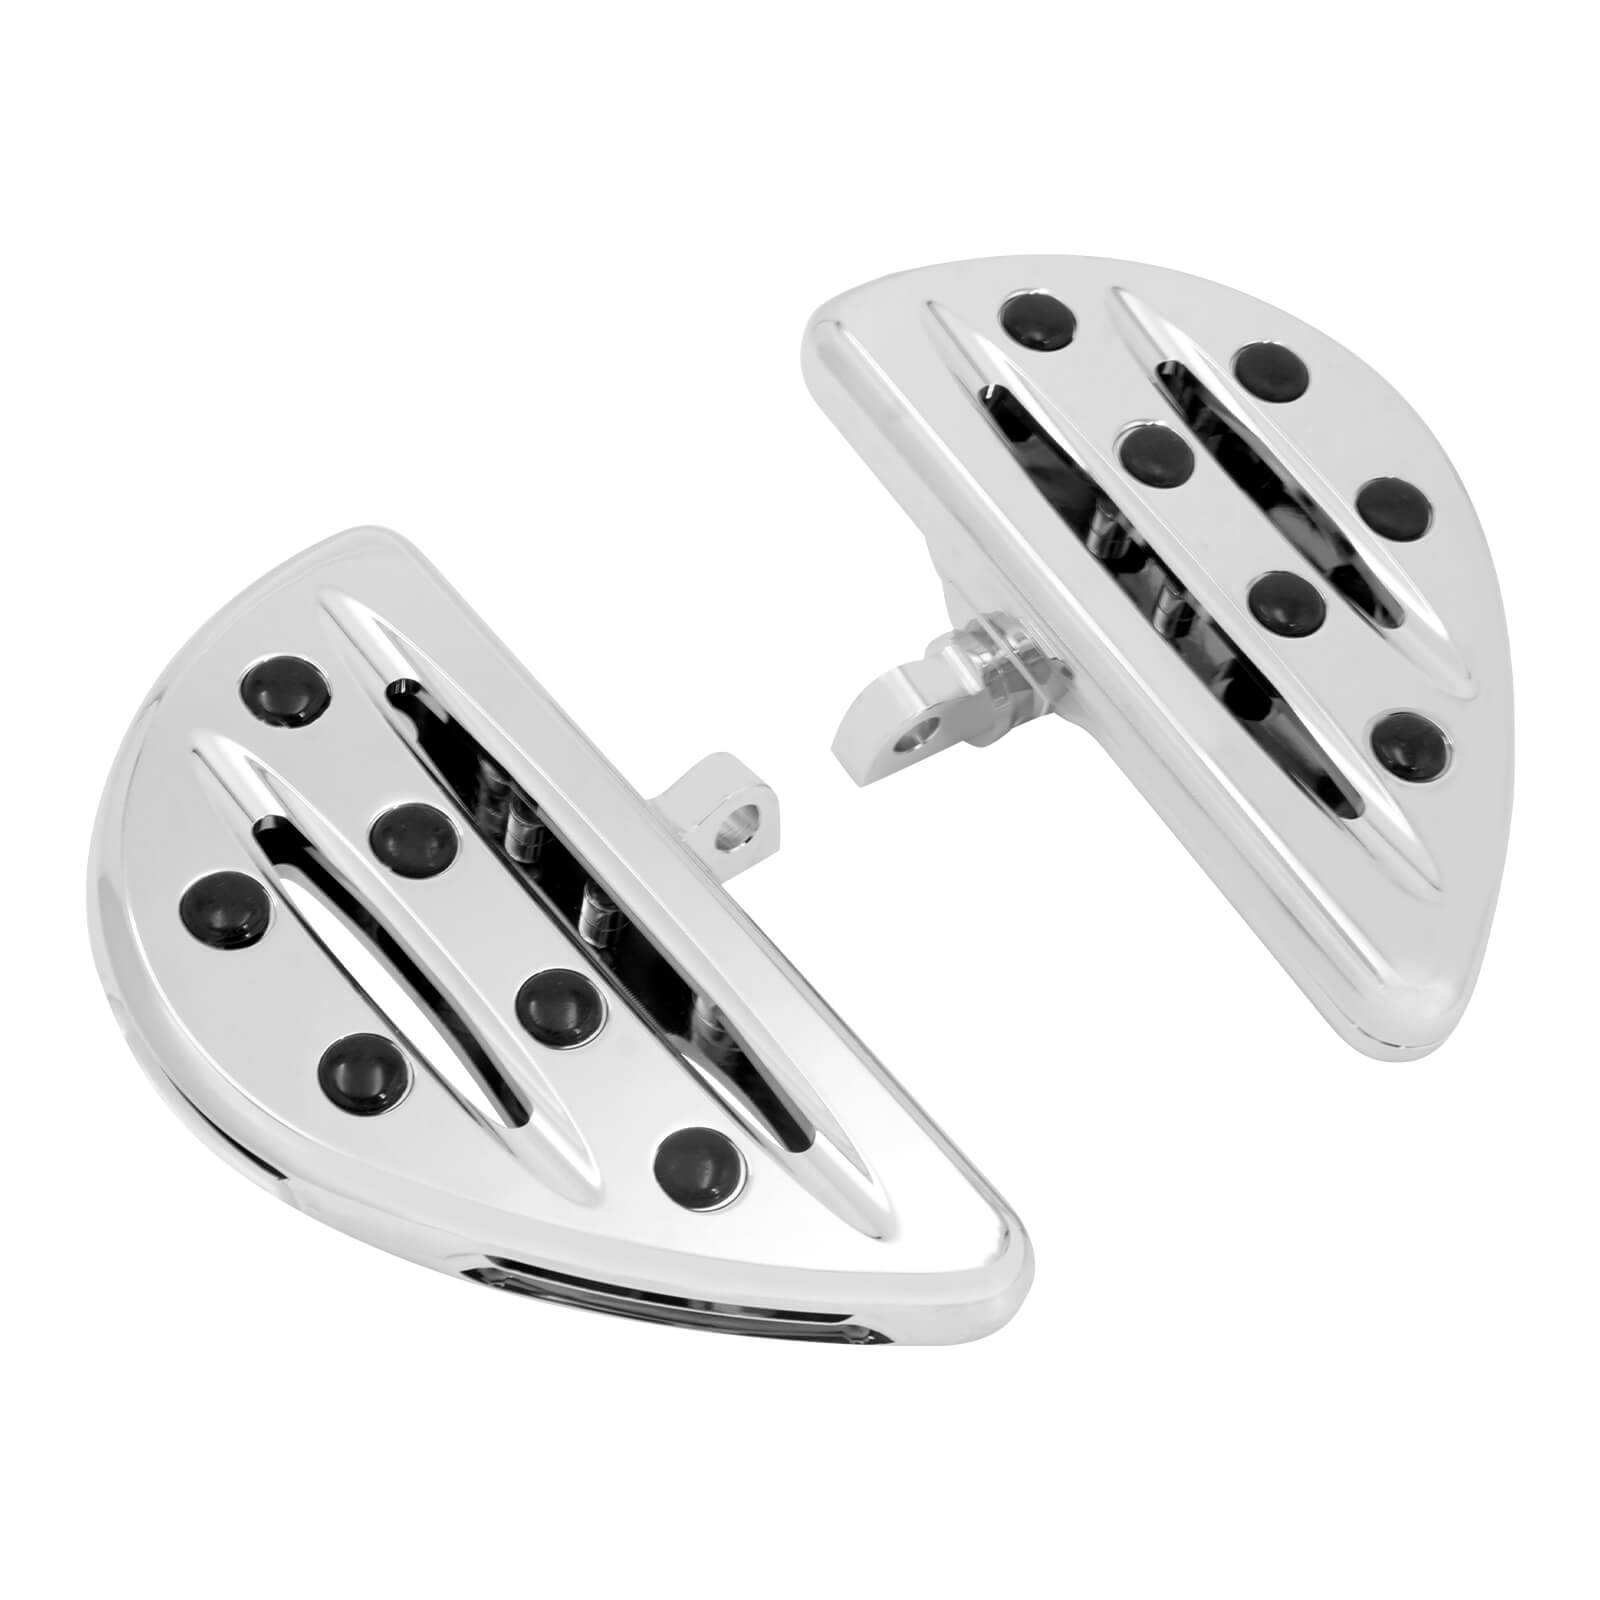 Mactions highway foot pegs for harley Touring Sportster chrome PE002201